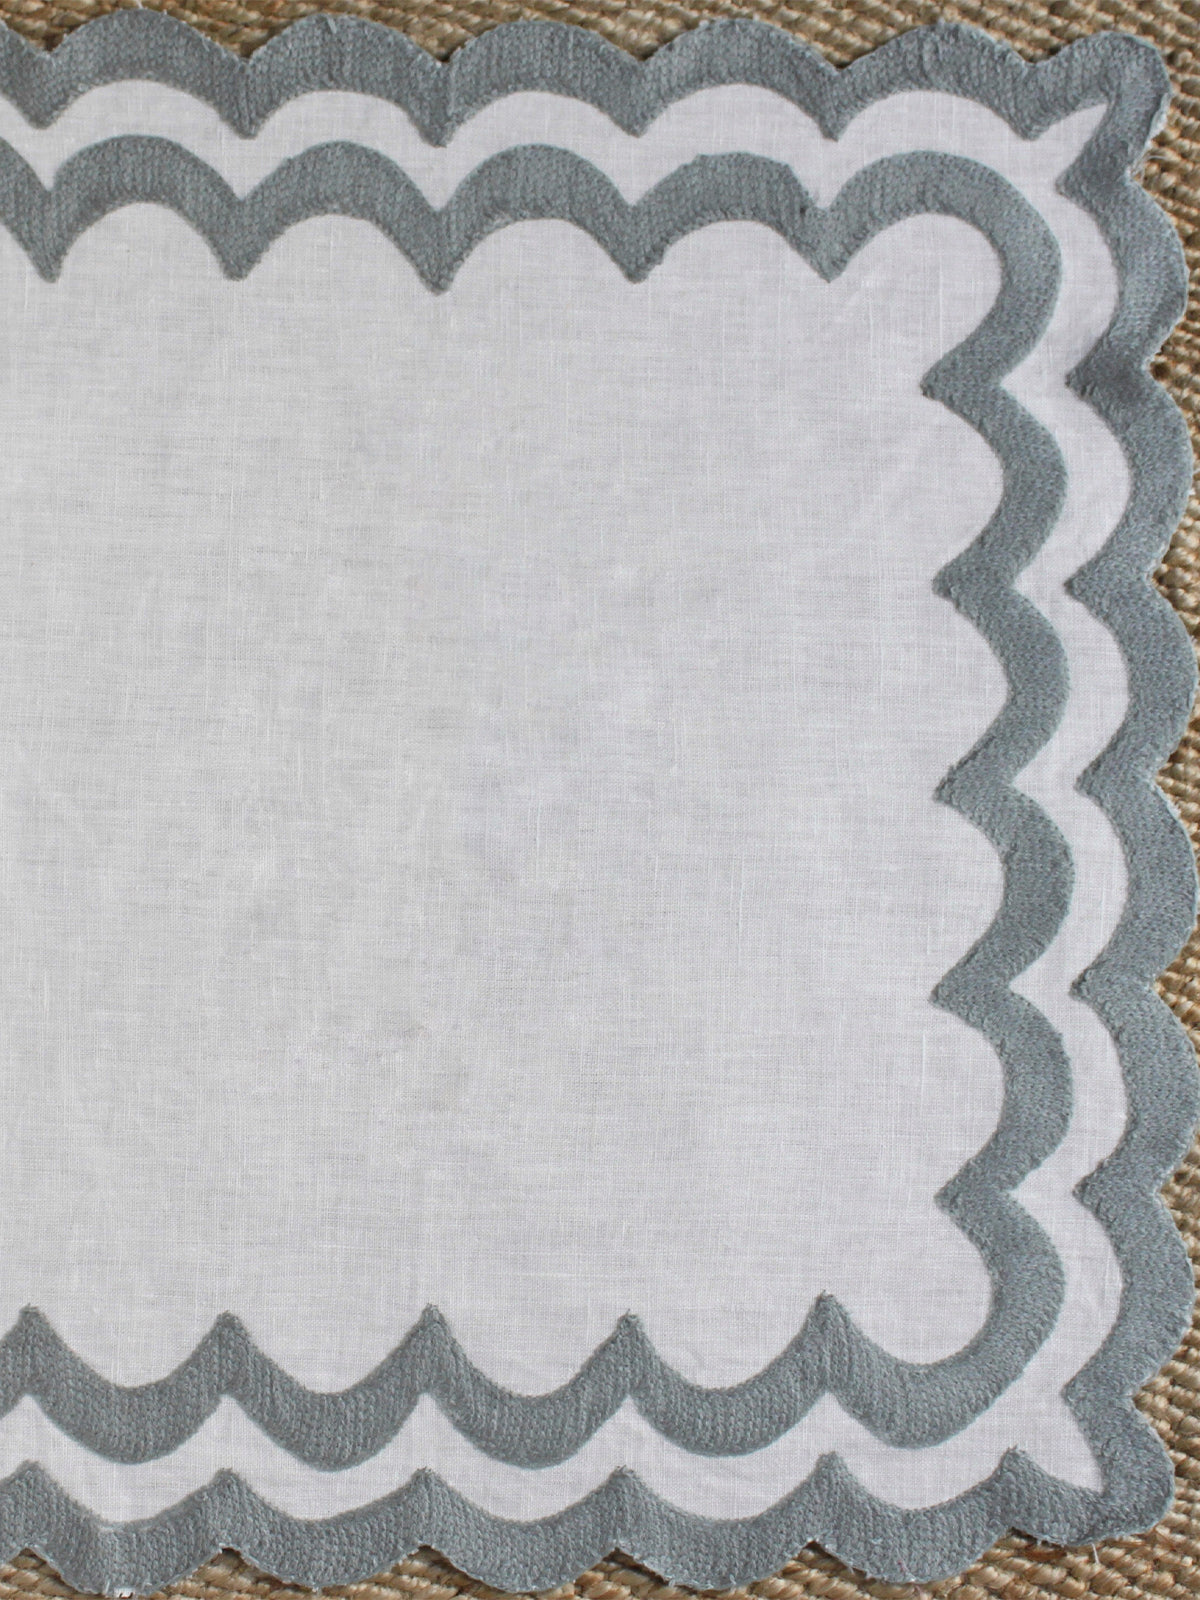 Scalloped Napkins in Dove - Set of Four